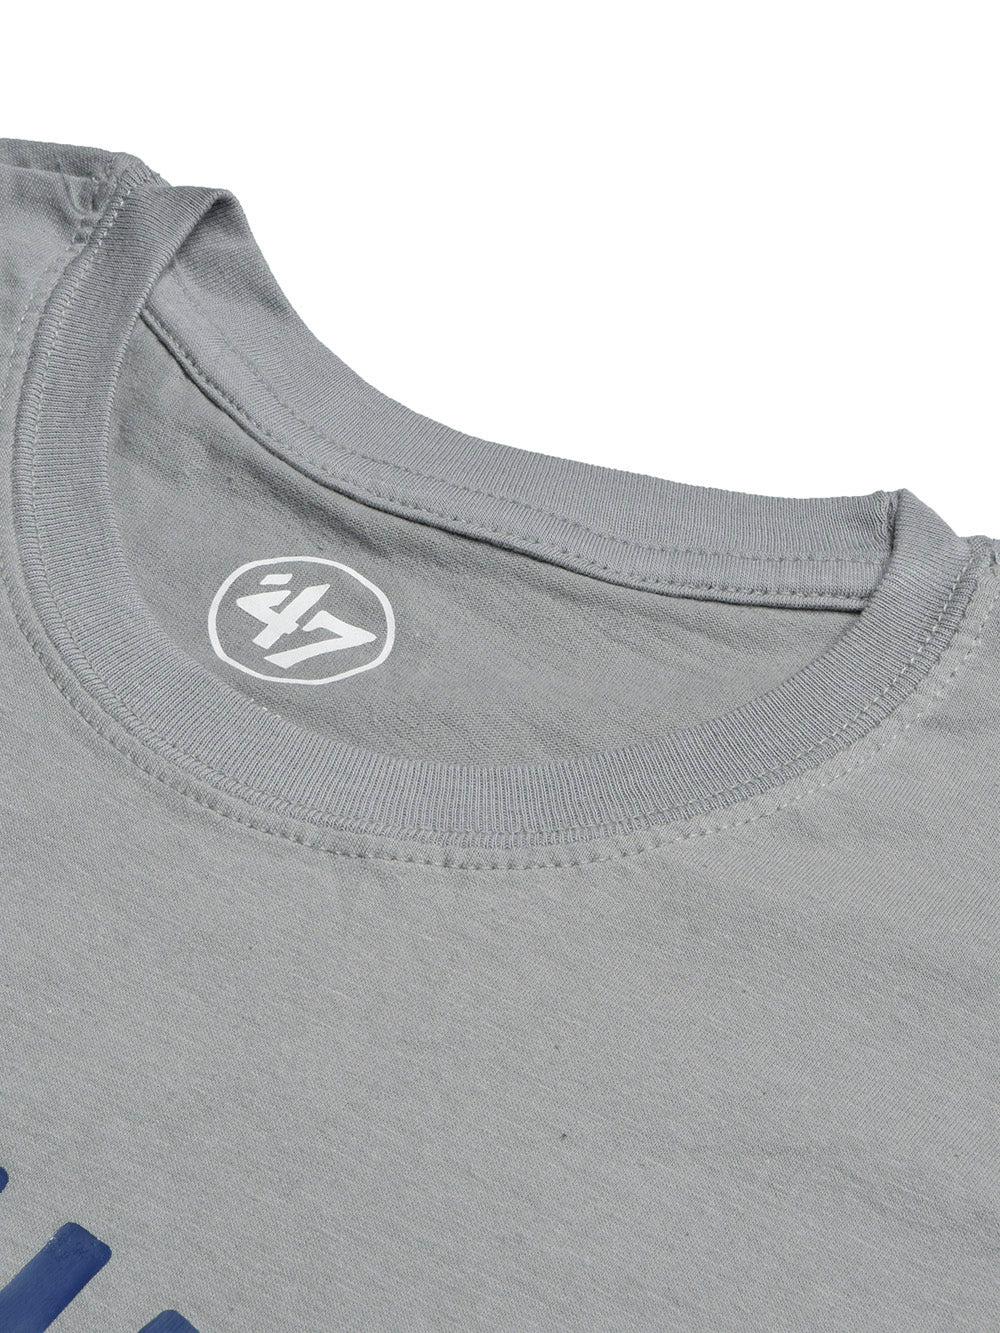 47 Single Jersey Crew Neck Tee Shirt For Men-Slate Grey with Print-BE912